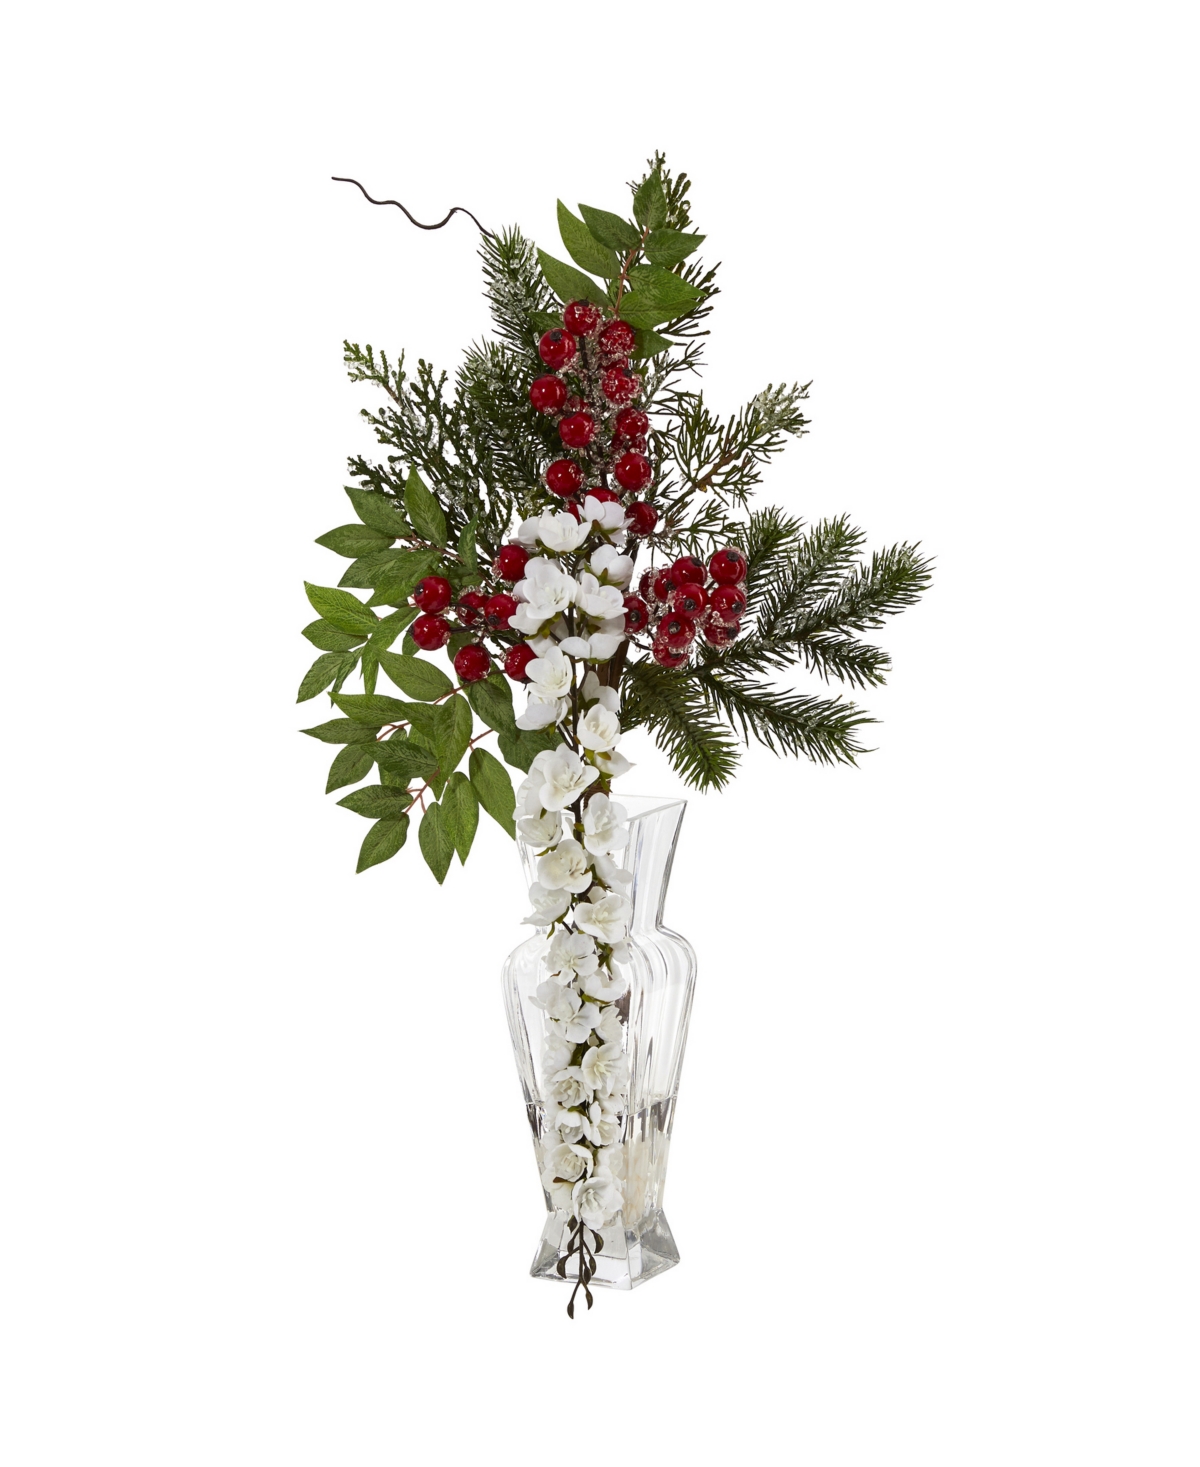 Wisteria, Iced Pine and Berries Artificial Arrangement in Glass Vase, 25" - Red, Green